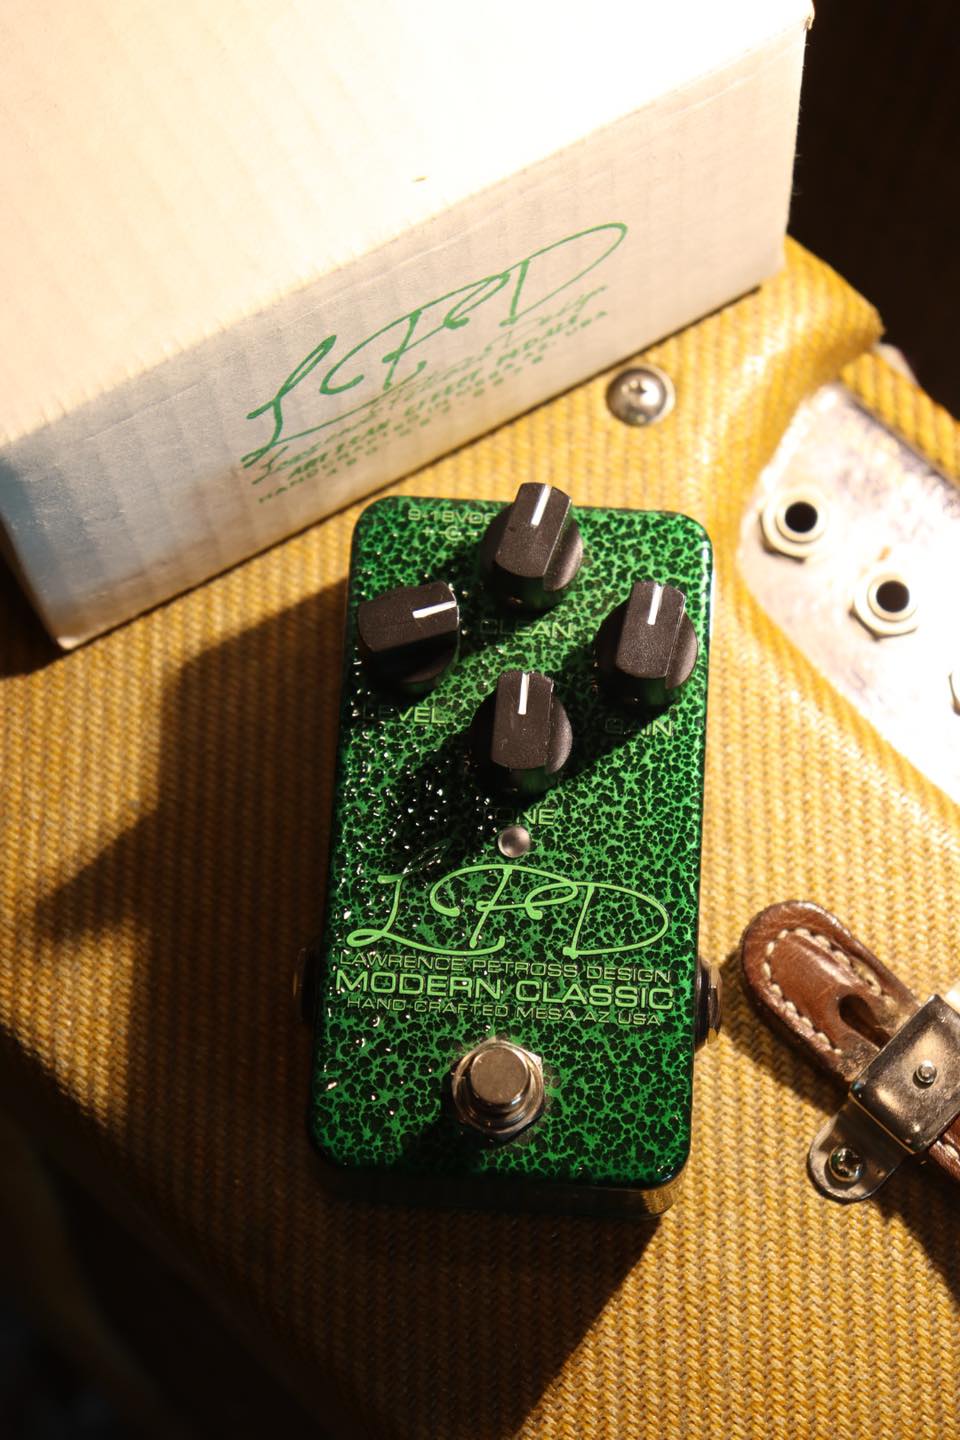 LPD Modern Classic Overdrive ( Lawrence Petross Designs )